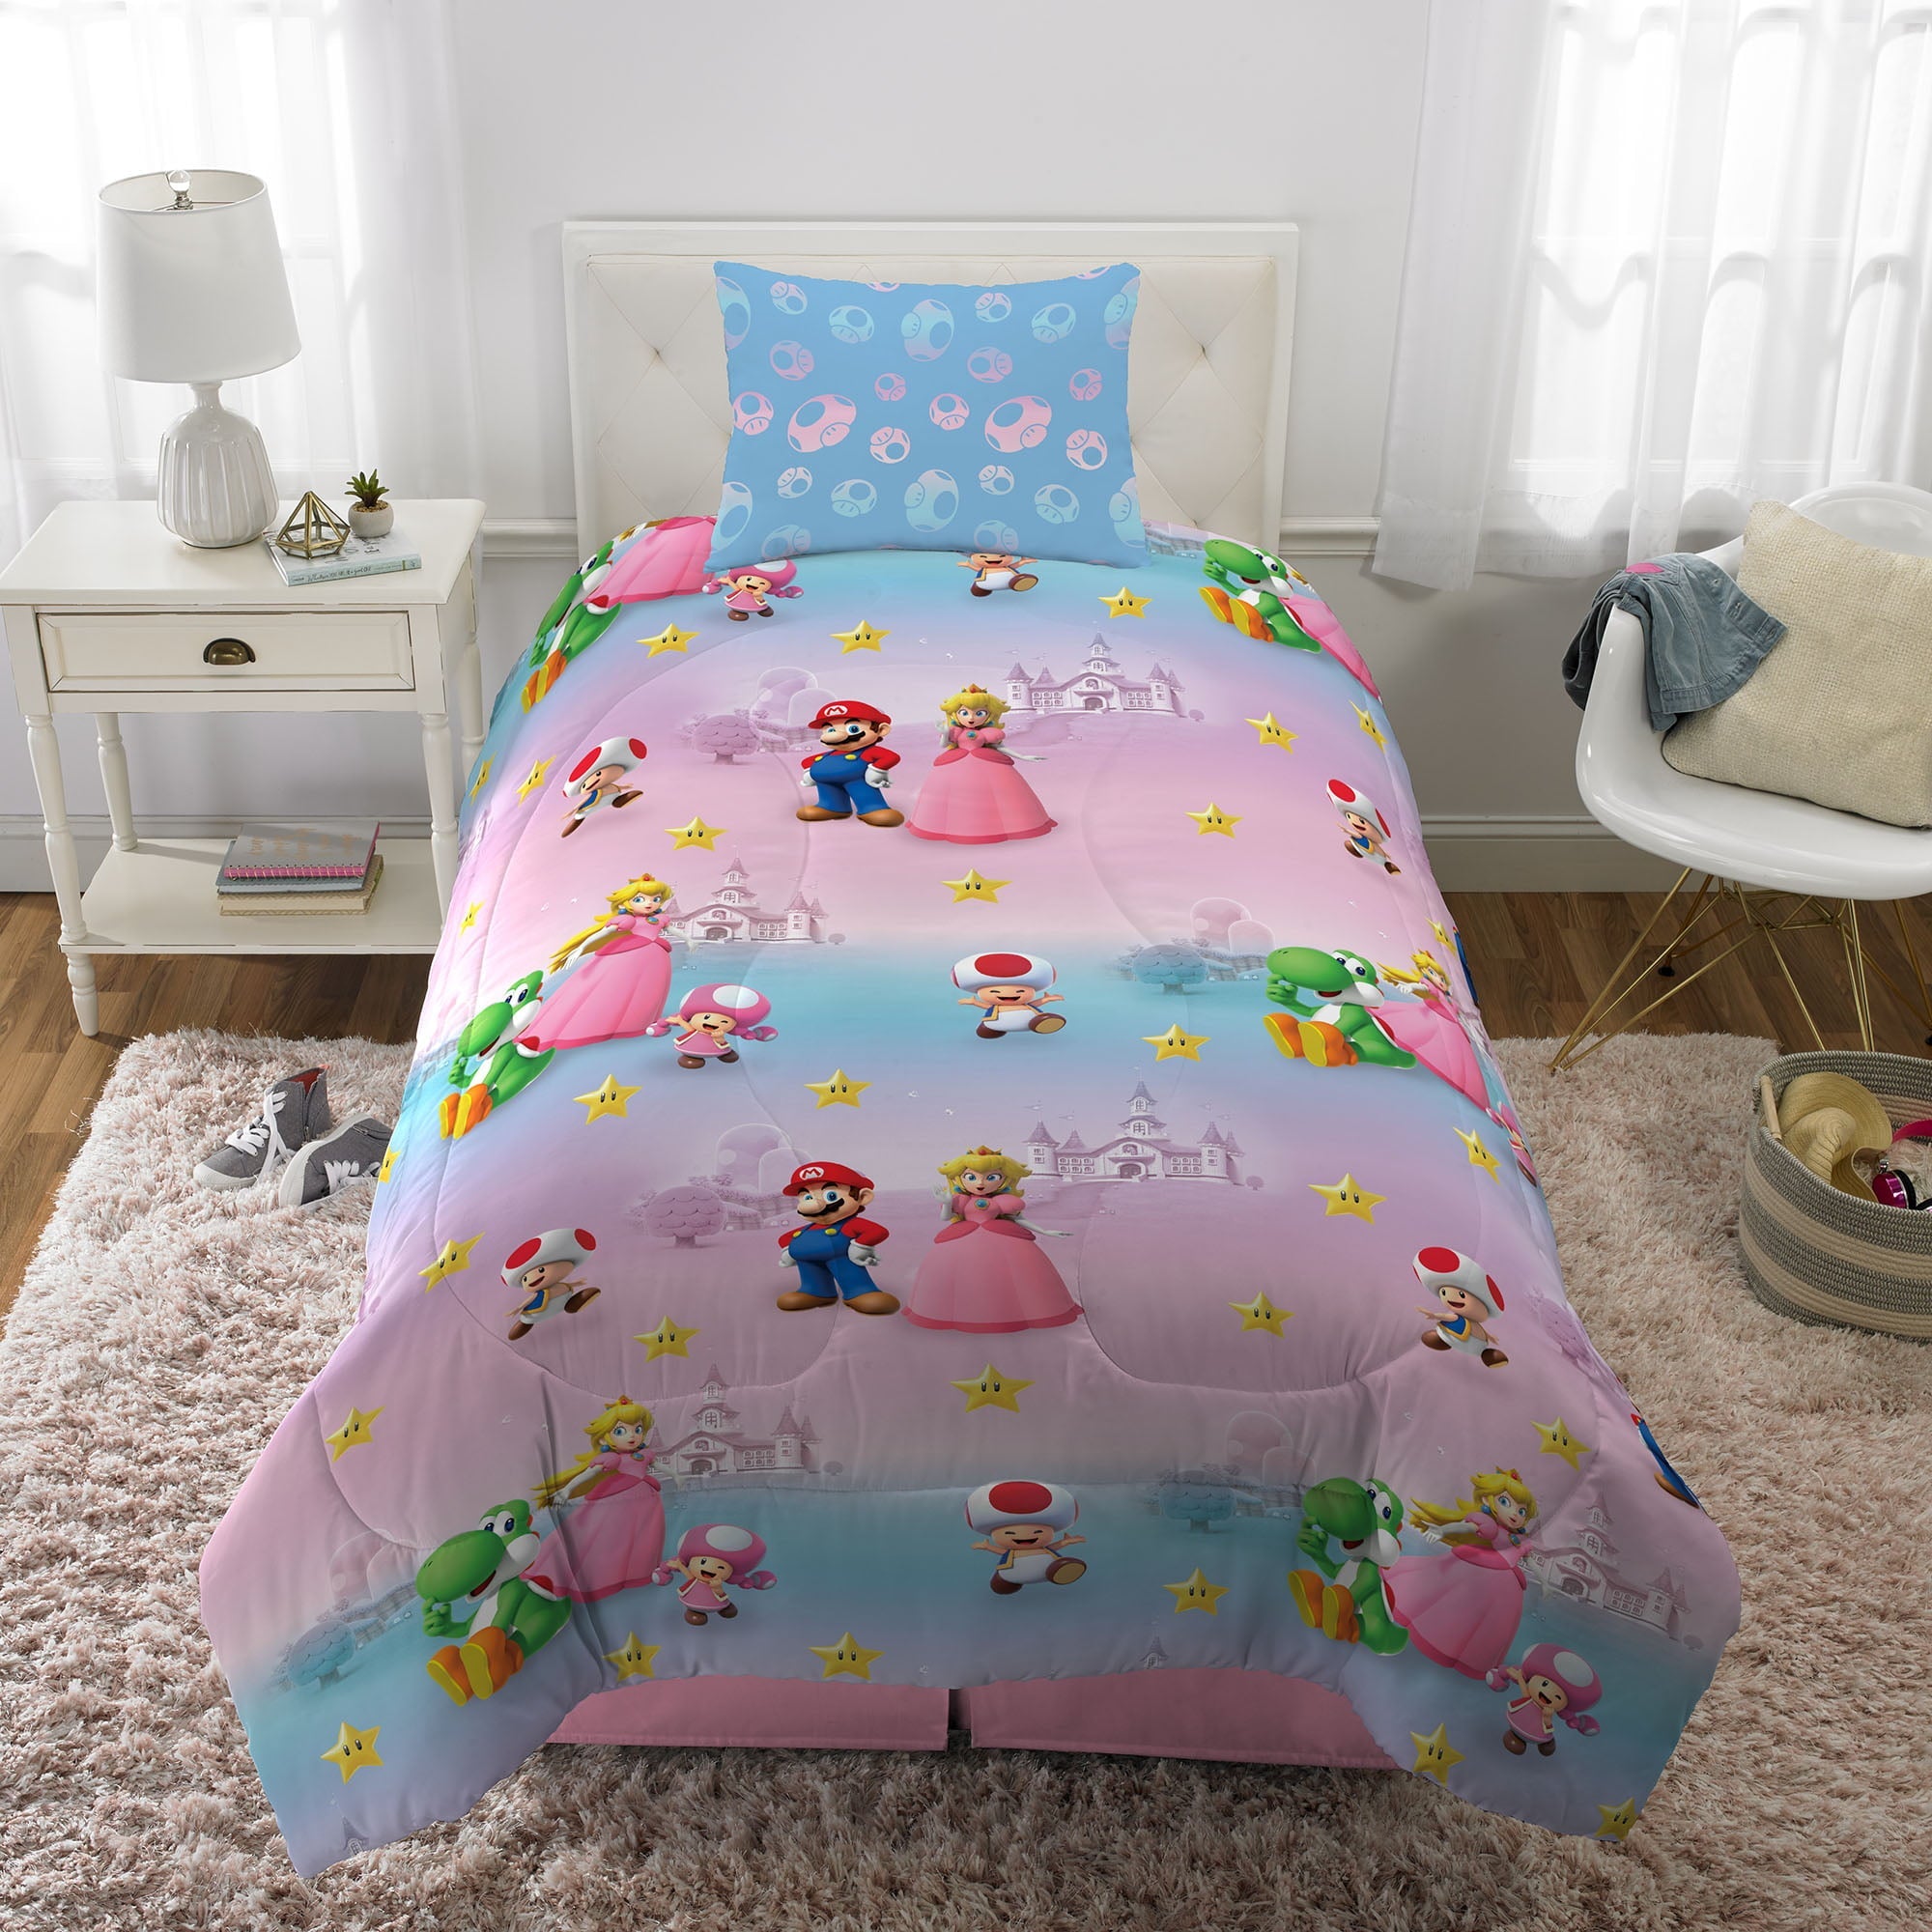 Super Mario Girl Kids Twin Bed in a Bag, Gaming Bedding, Comforter and Sheets, Pink, 